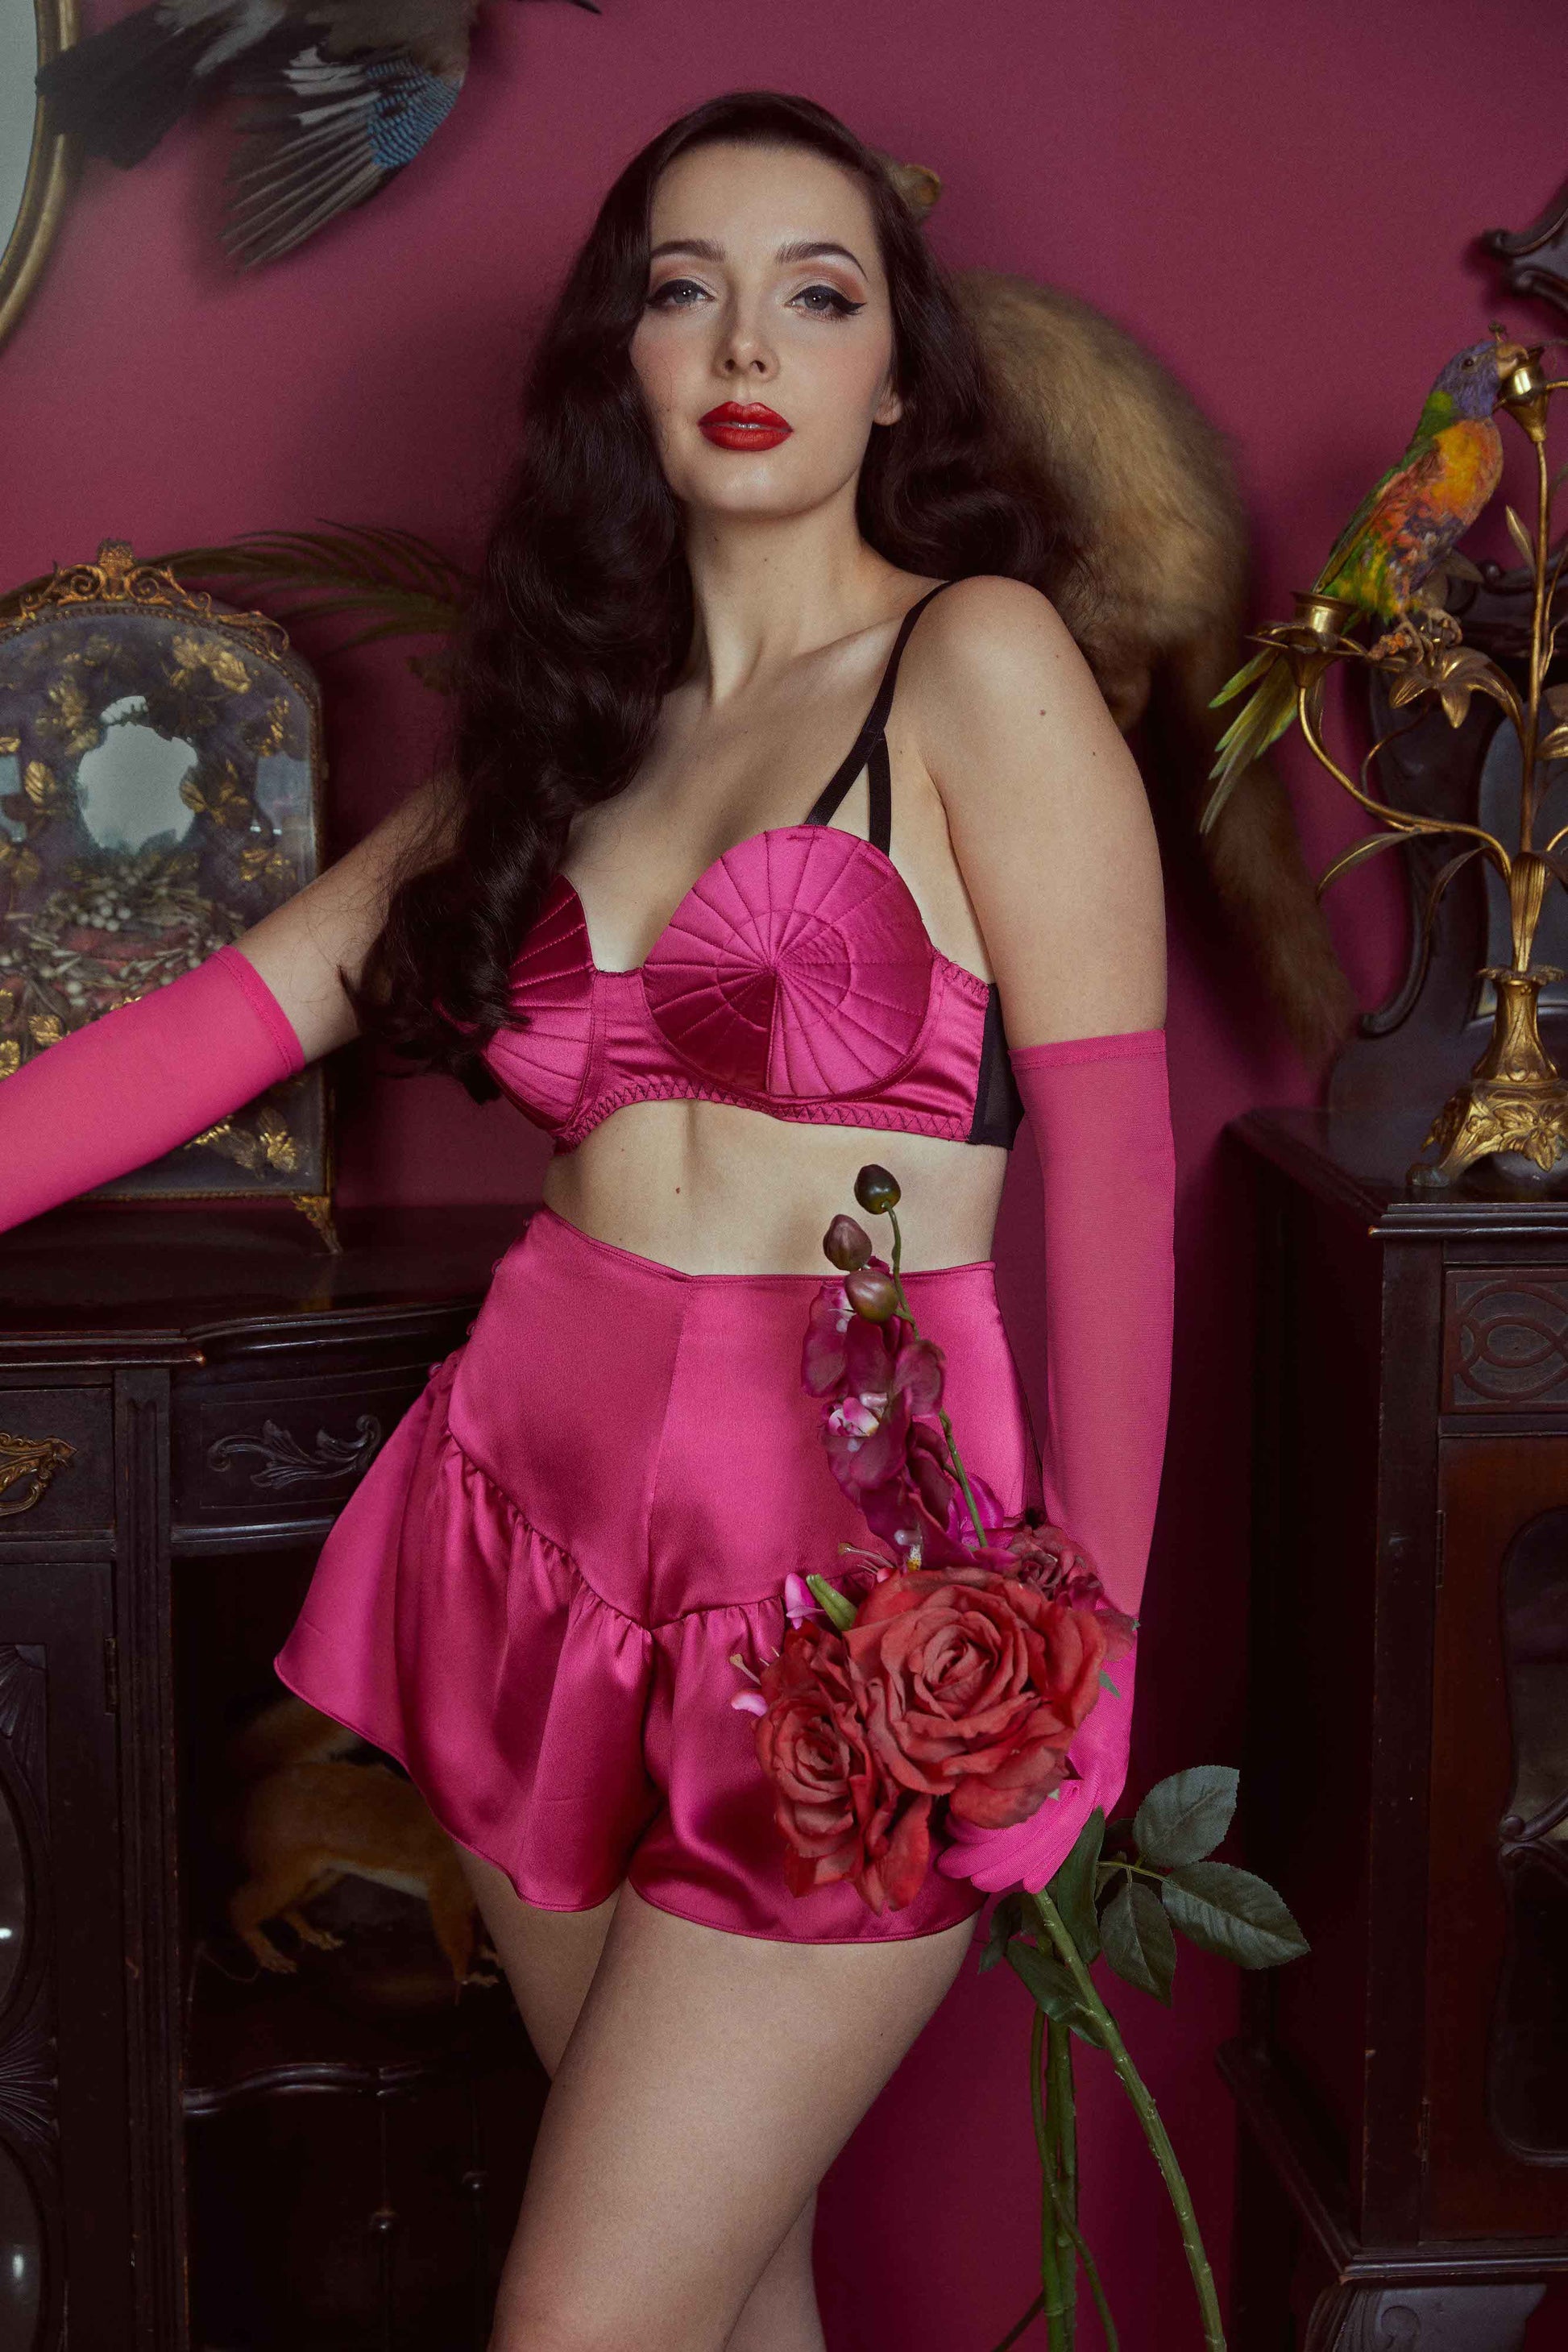 Hot Pink French Knickers - Bettie Page Lingerie - Gigi's - Canada